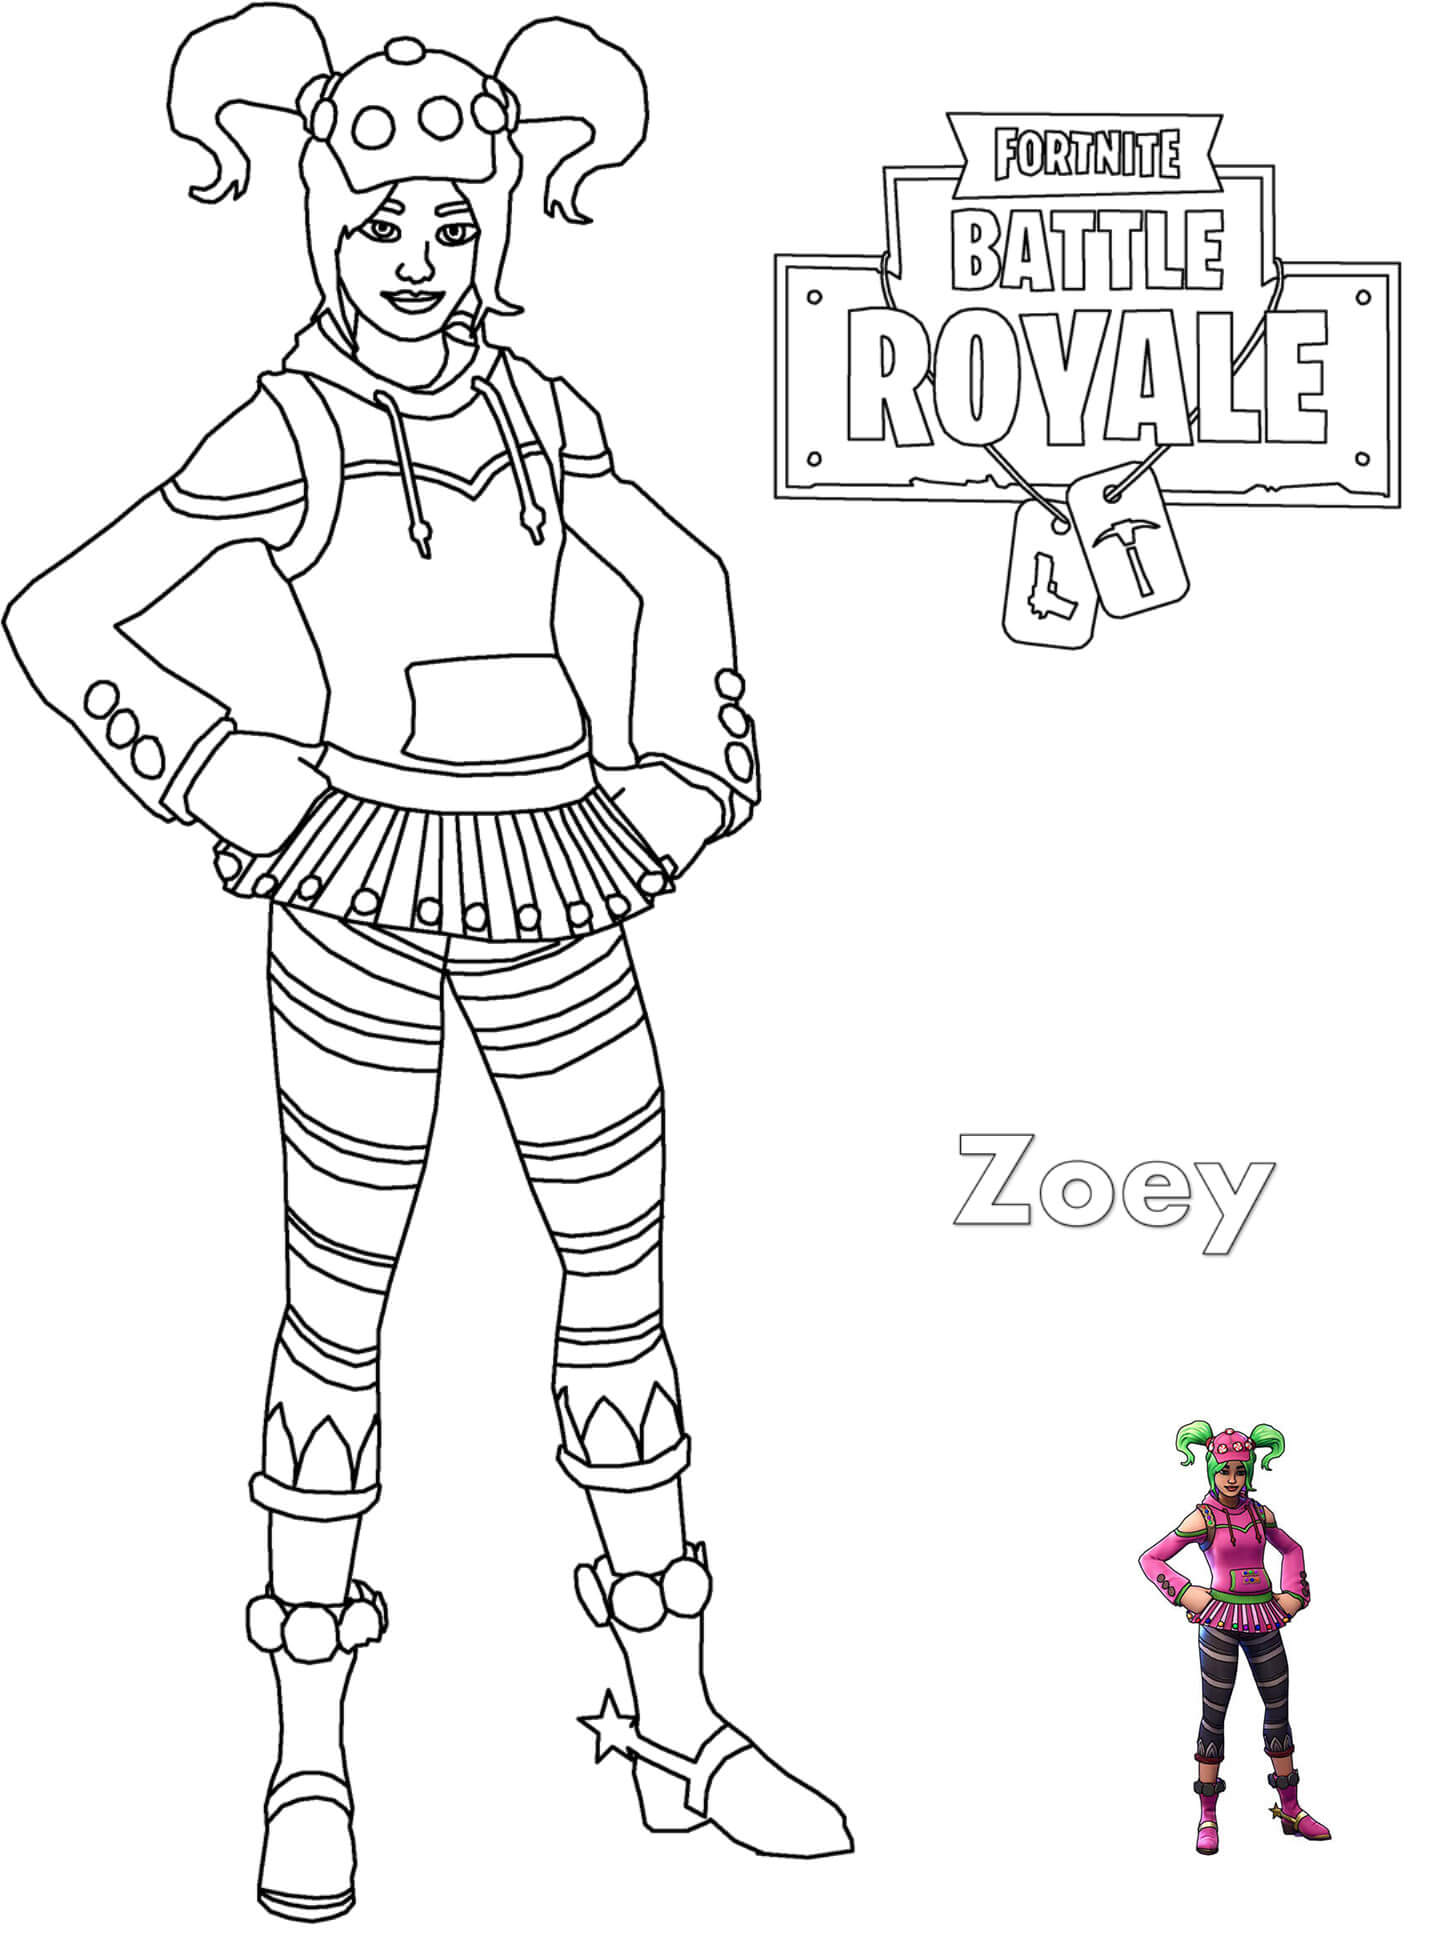 Zoey Fortnite Girl Coloring Page